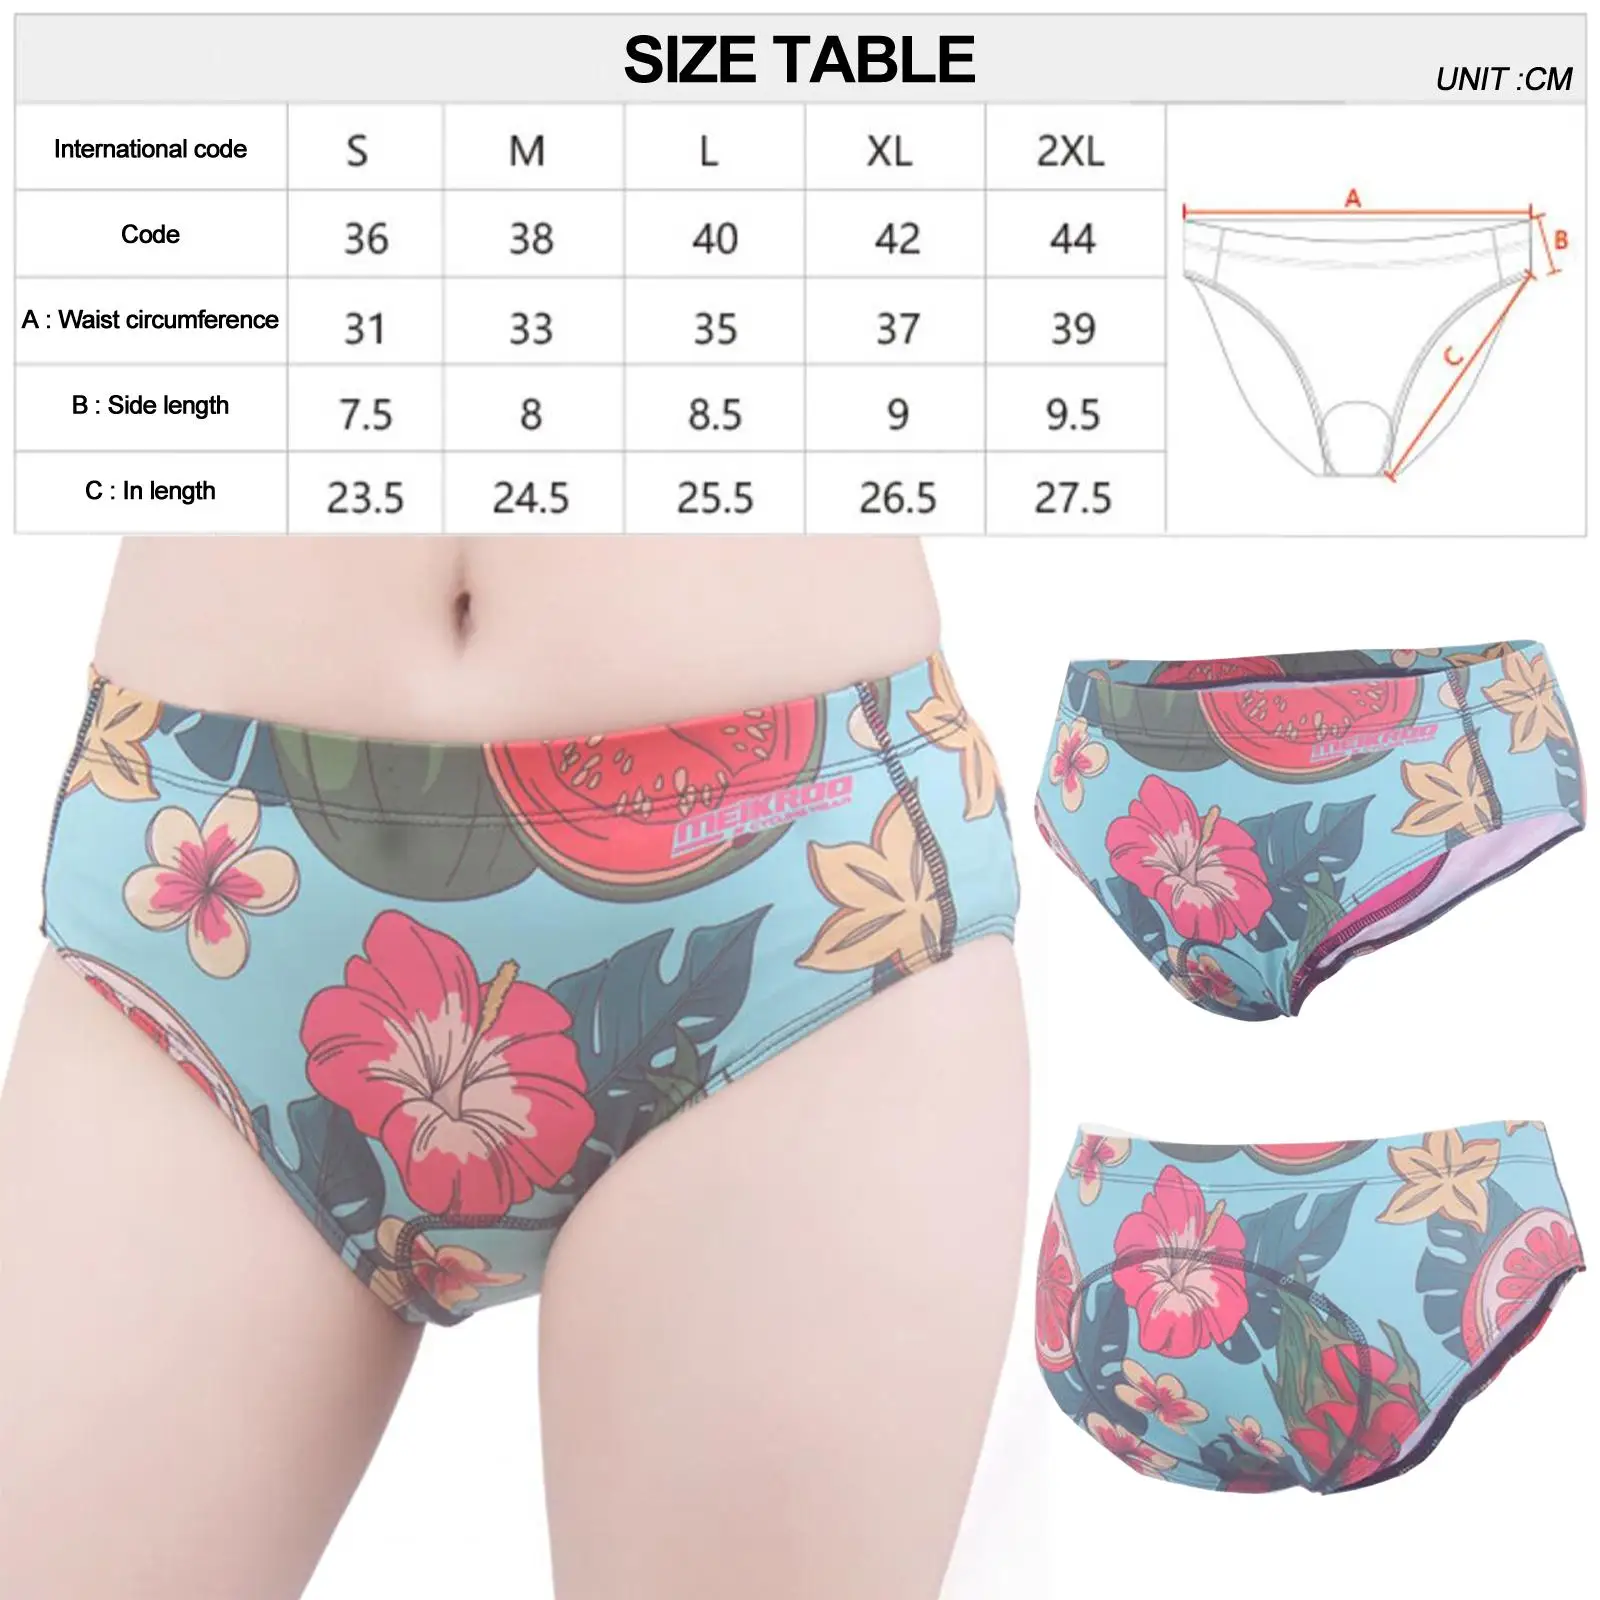 Women`s 3D Padded Cycling Underwear Shorts Bike Triangle Shorts Underpants Lightweight Breathable Undershorts Briefs for Riding